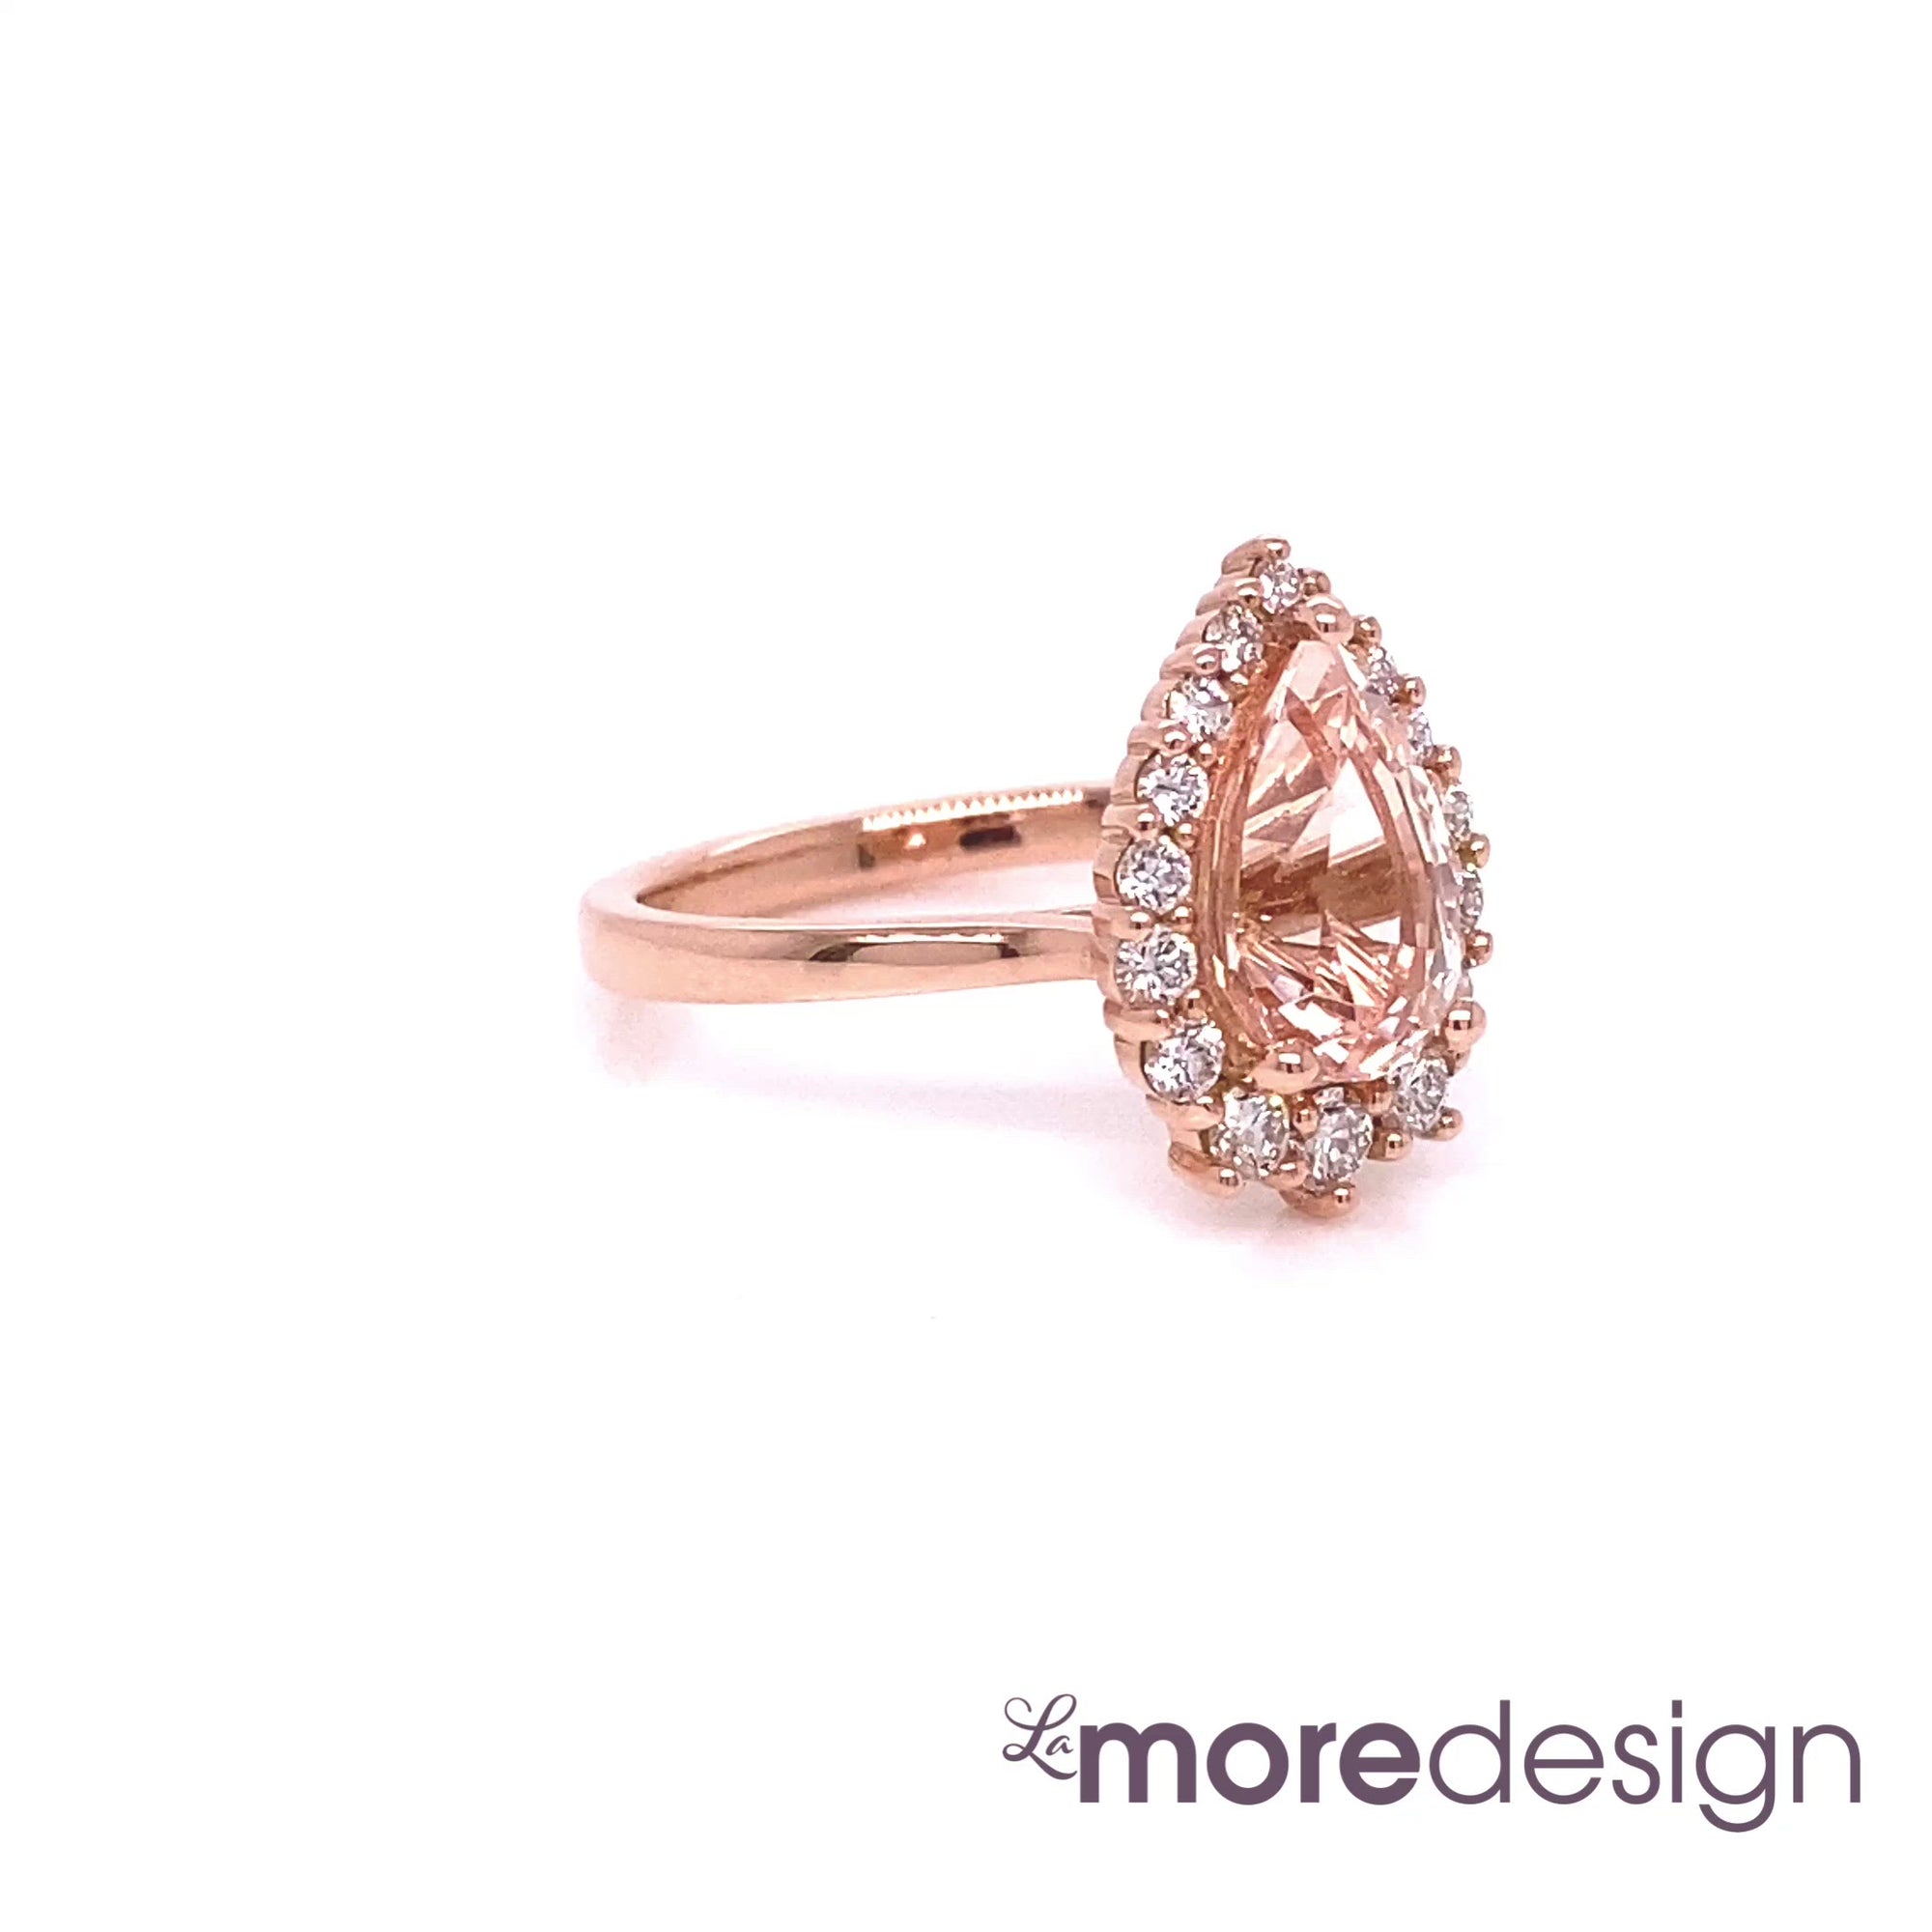 This truly unique and stunning morganite engagement ring is crafted in 14k rose gold Tiara Halo Diamond ring setting with a large 1.73-carat pear cut natural peach morganite center ~ total gemstone and diamond weight of the whole ring is 2.18 ct.tw.  This one-of-a-kind pear-cut engagement ring is perfect for brides looking for diamond alternative engagement rings! All our wedding bands can pair beautifully with this gorgeous halo diamond morganite ring!